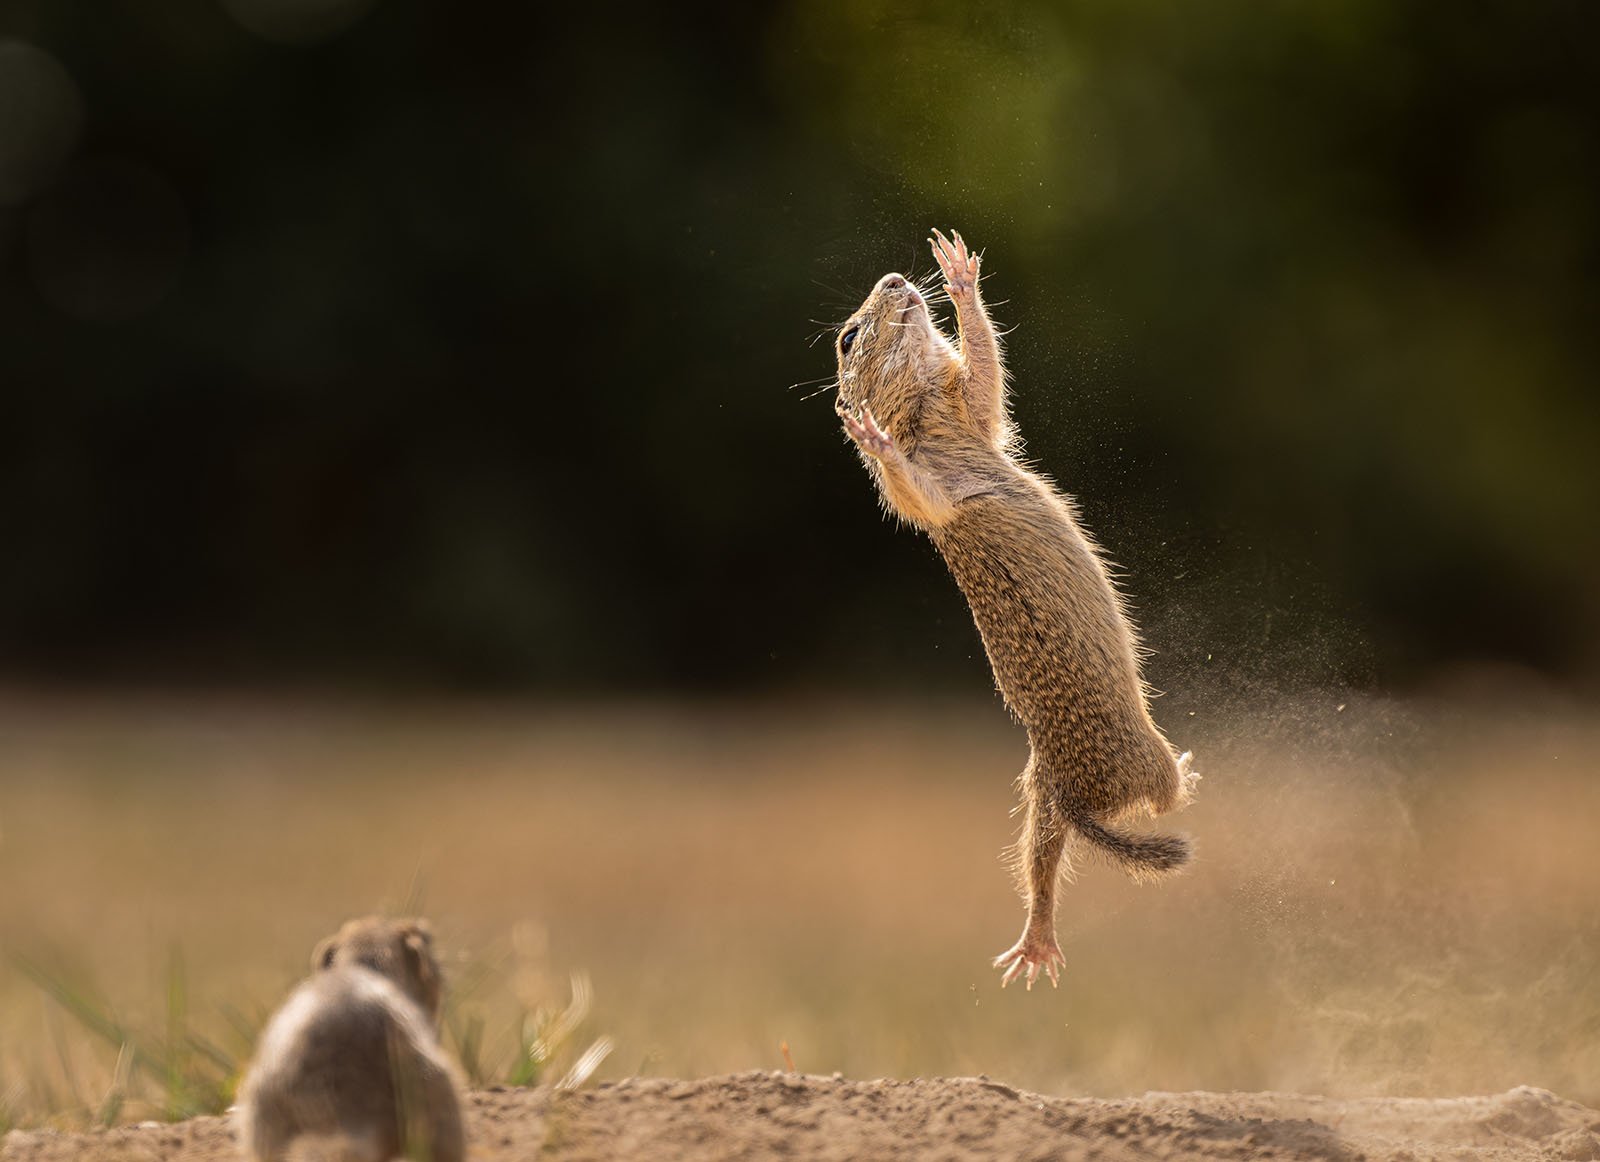 Comedy Wildlife photo finalists taking votes for funniest animal image